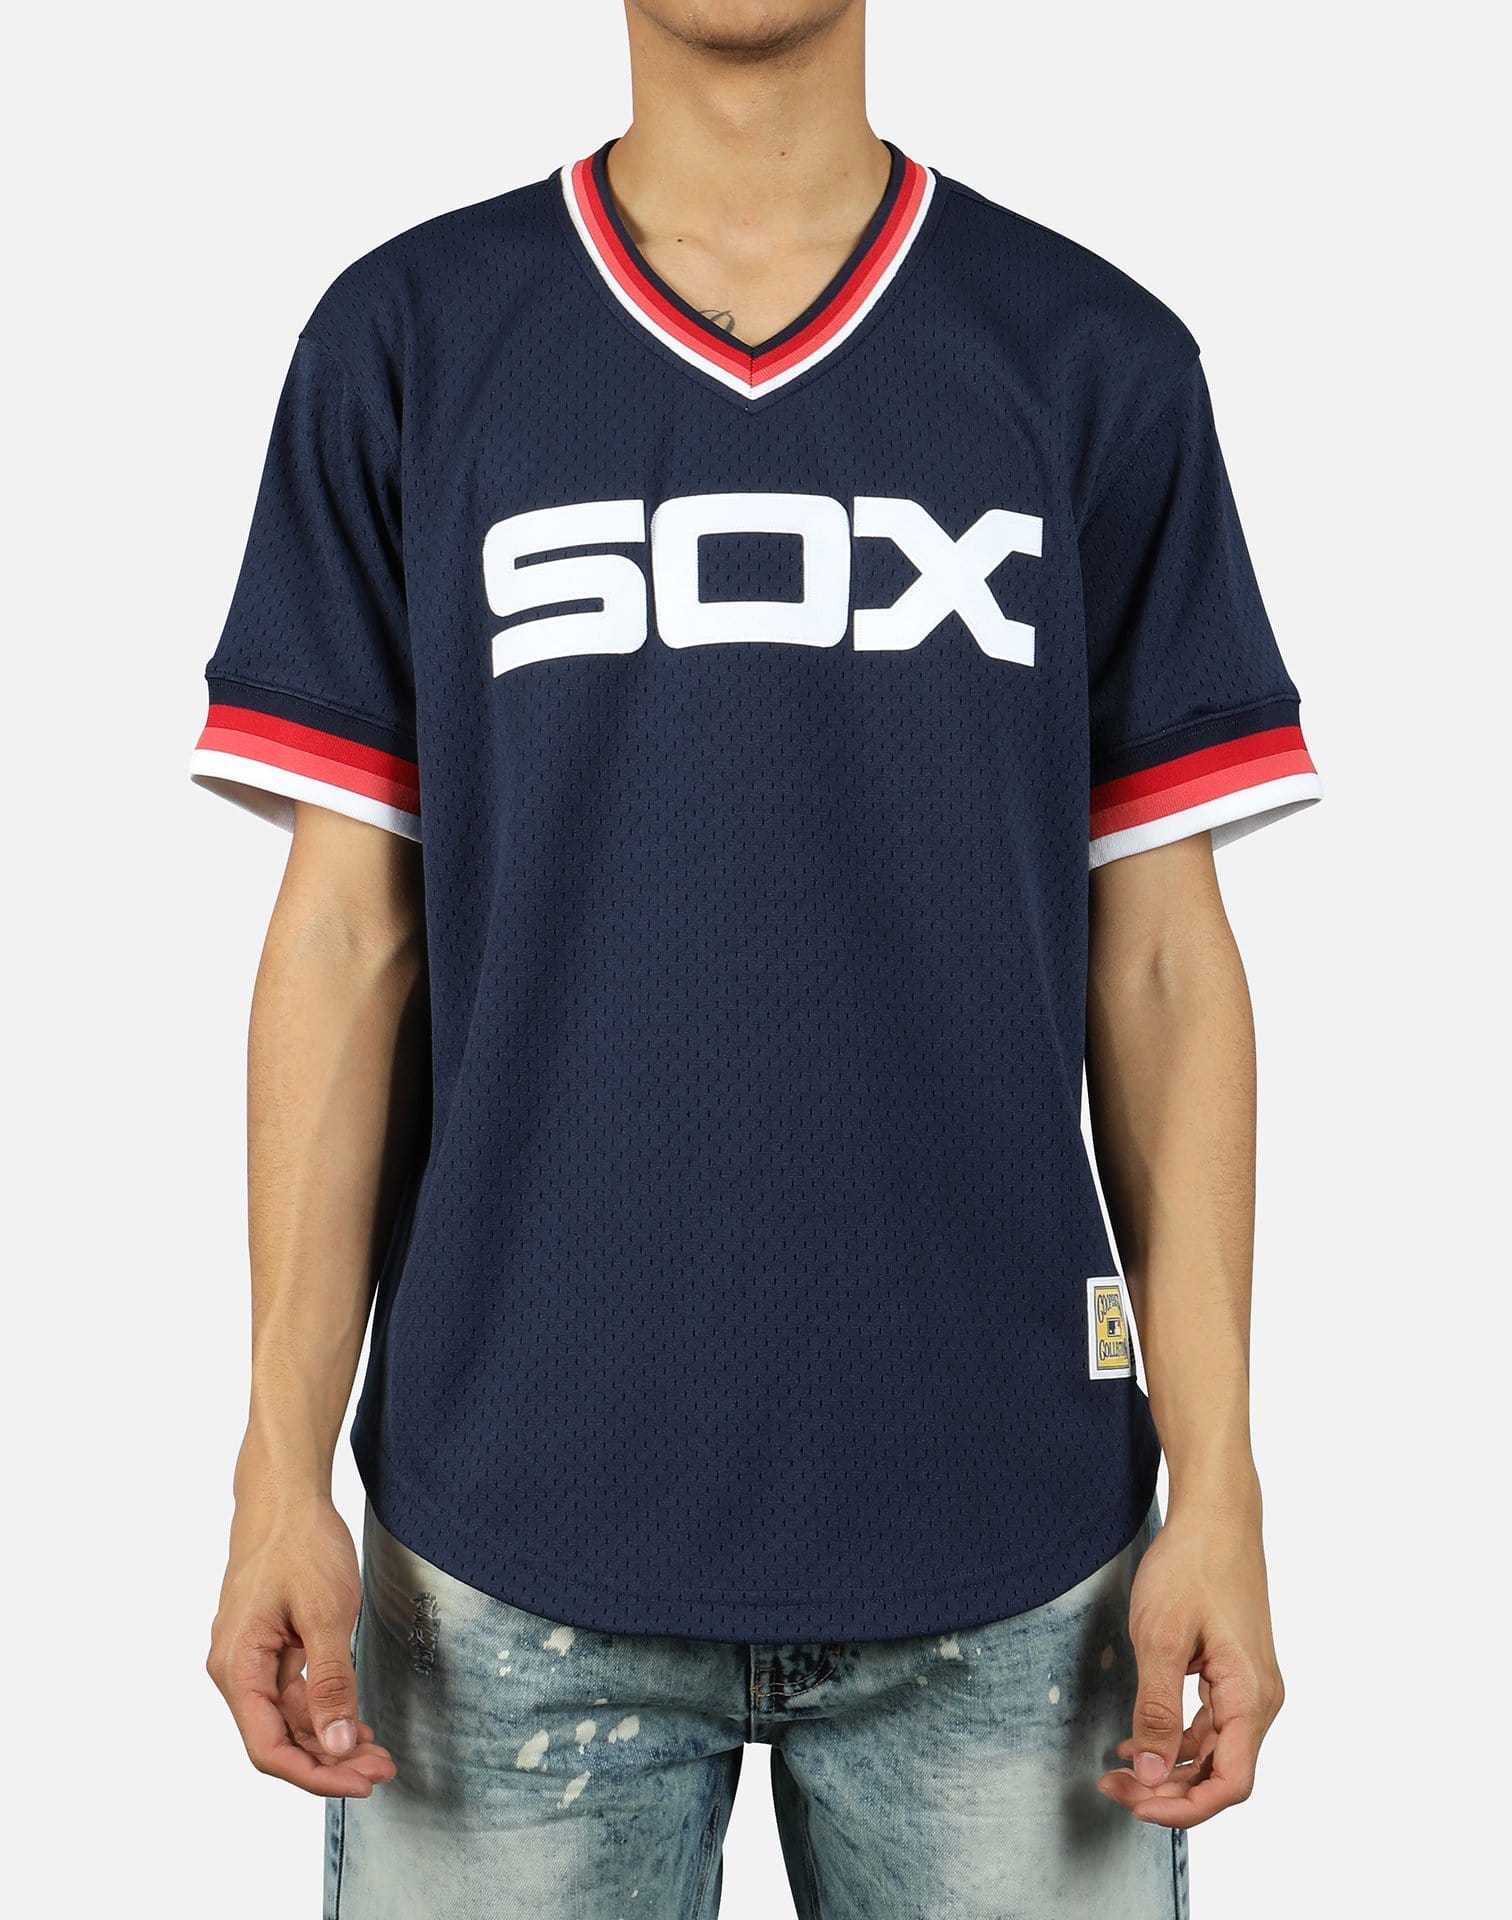 mitchell and ness white sox jersey